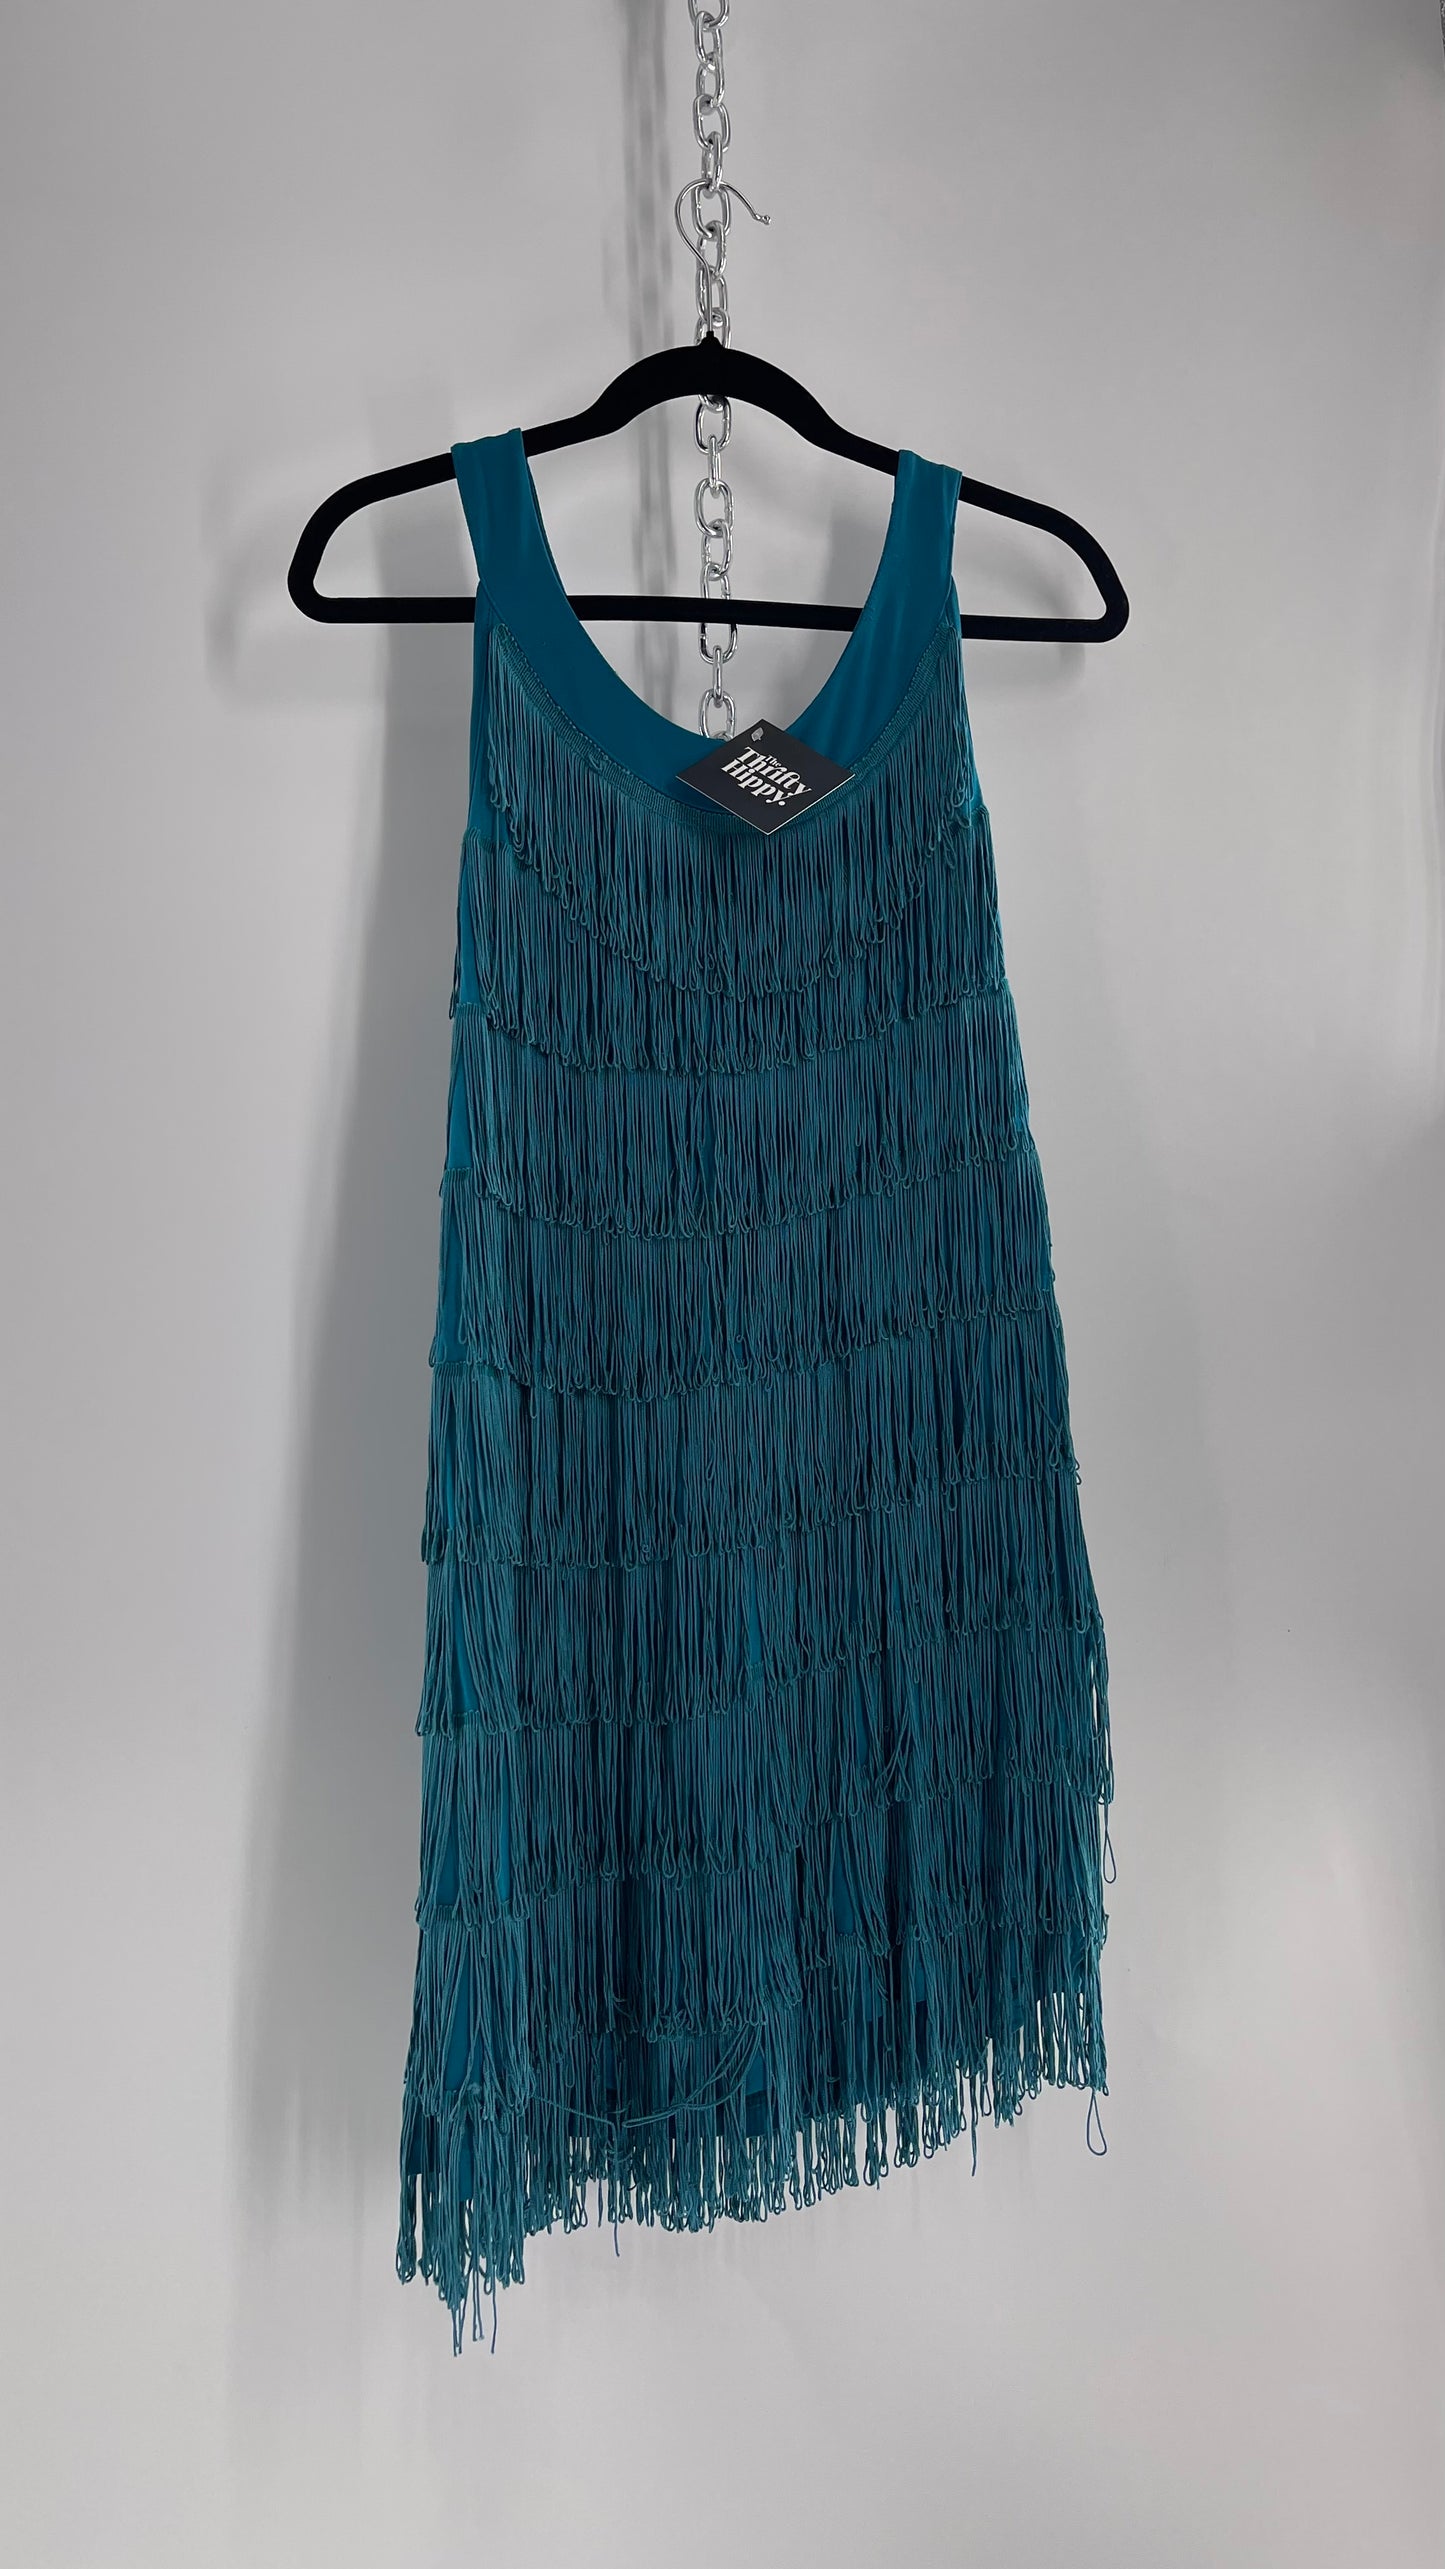 Vintage Teal Fringe Cowgirl Party Tunic Mini Dress (Small)